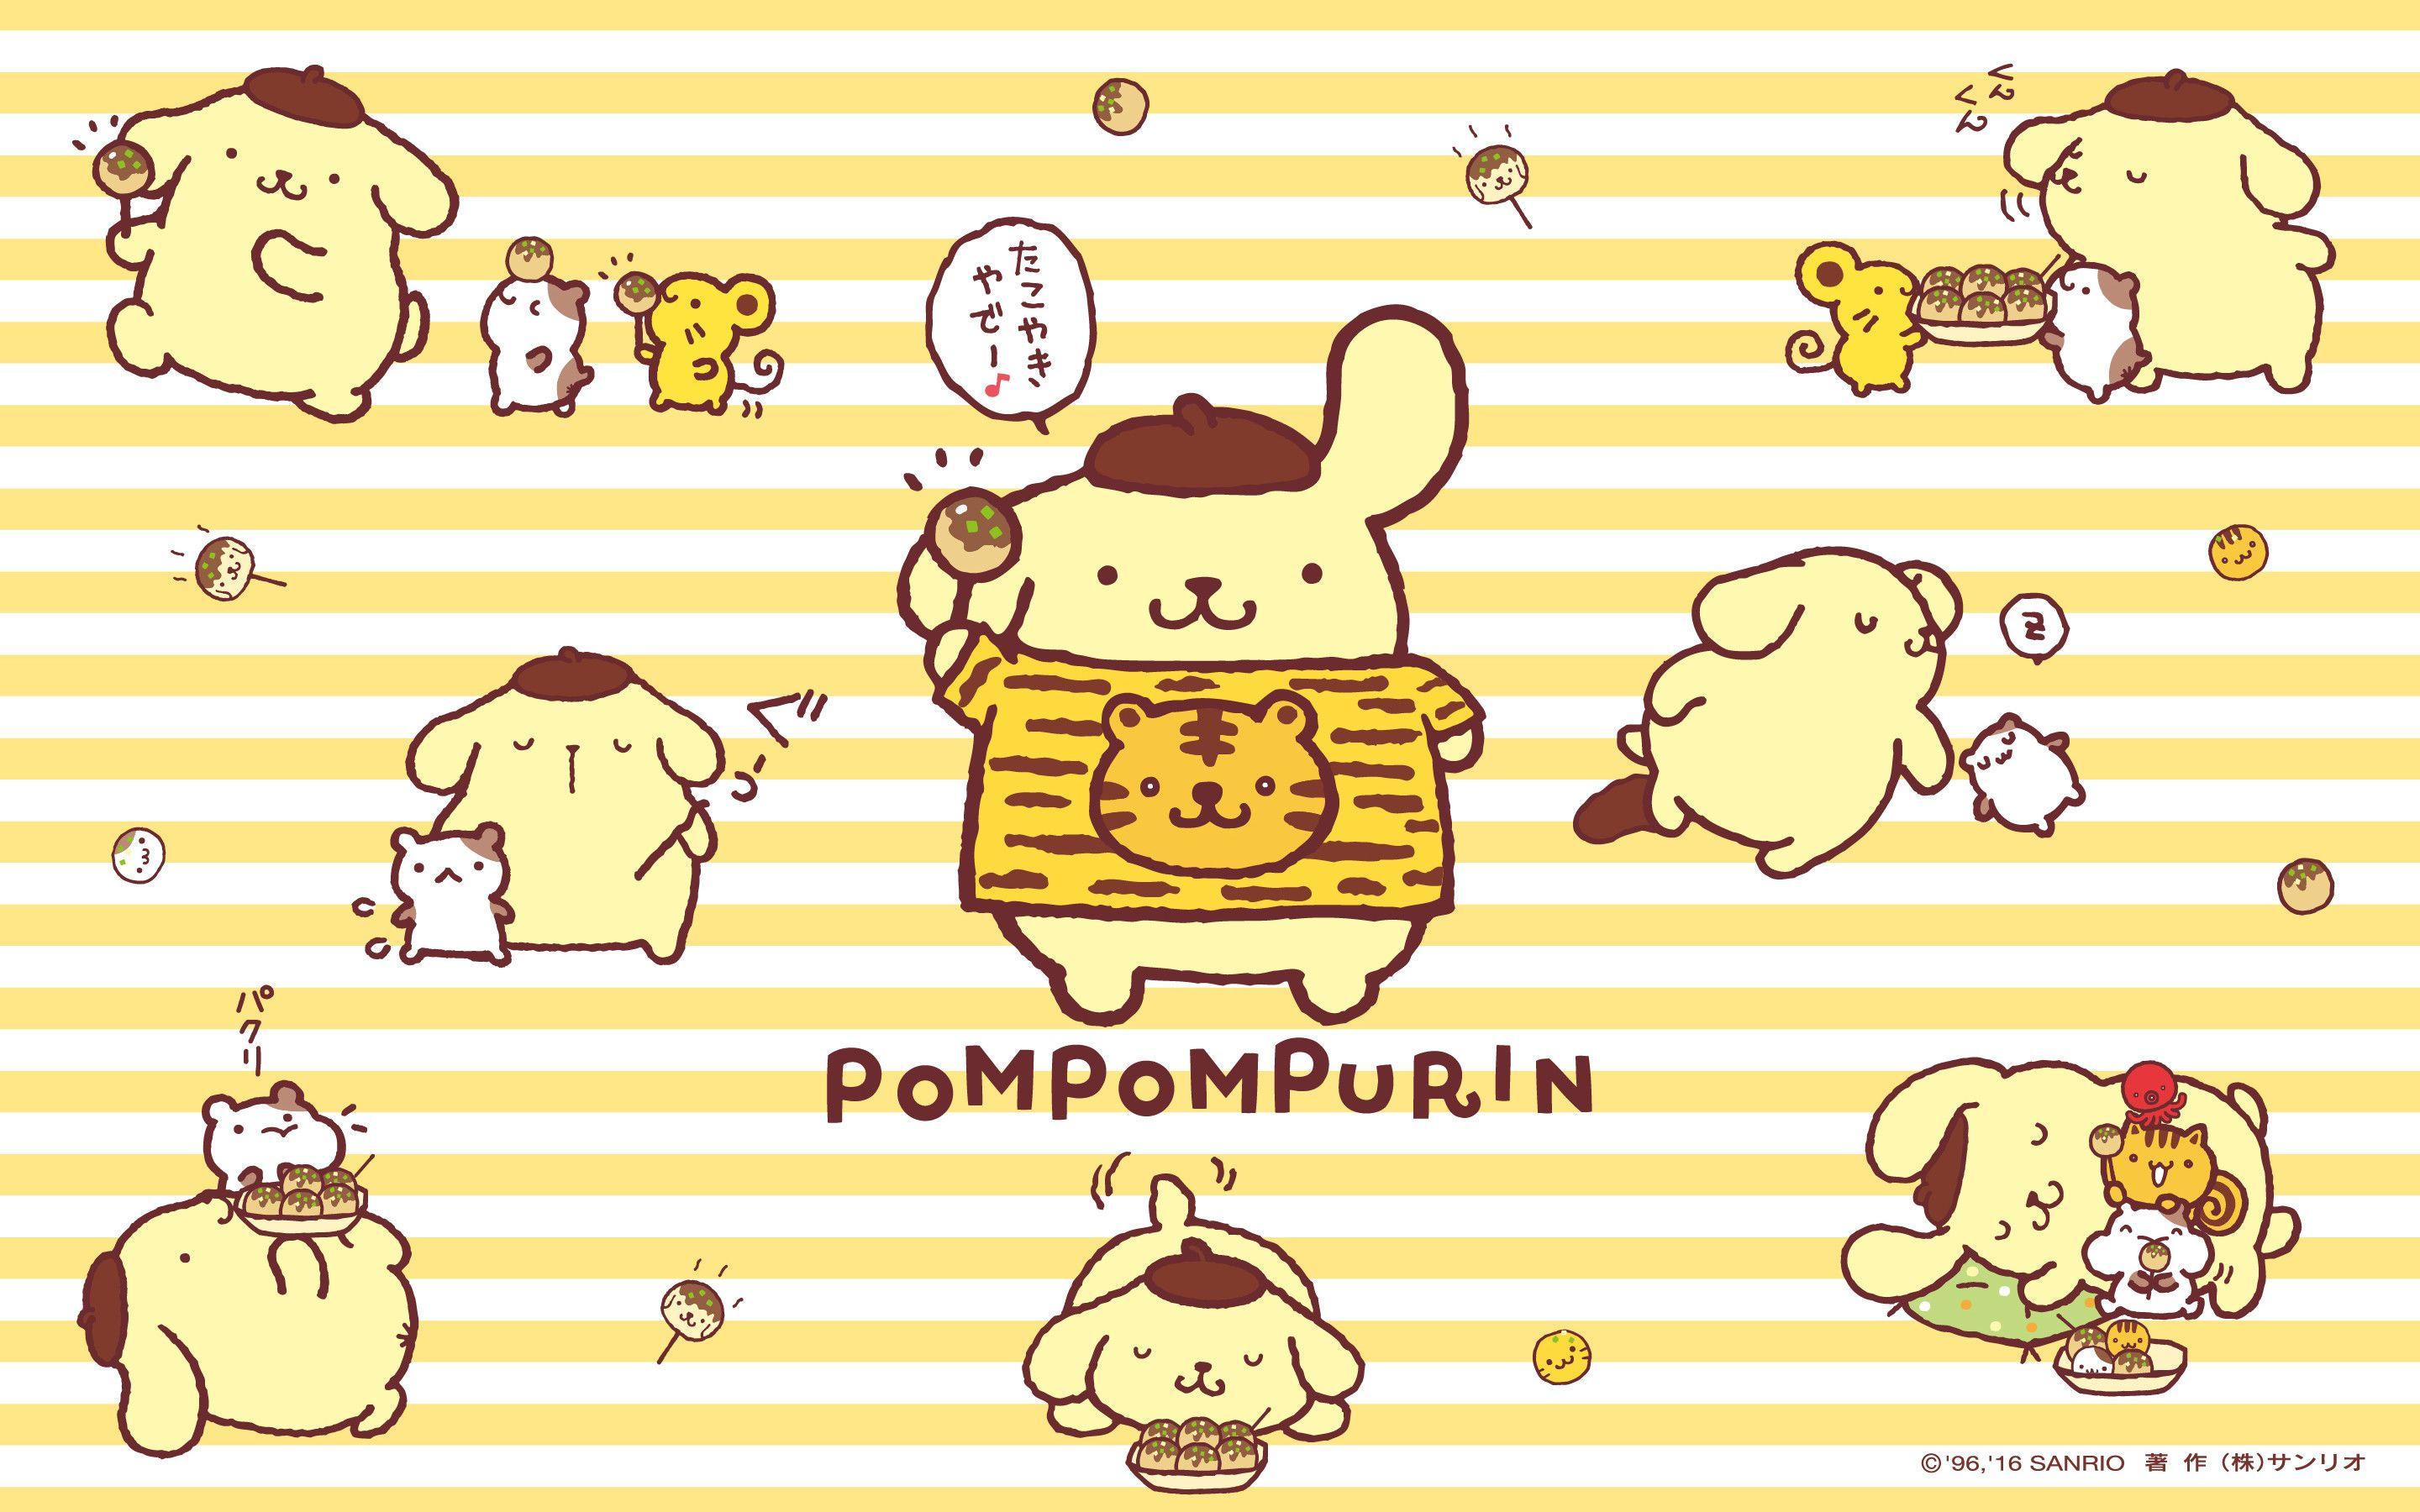 6 New Sanrio Pompompurin Phone Wallpapers To Save For Free